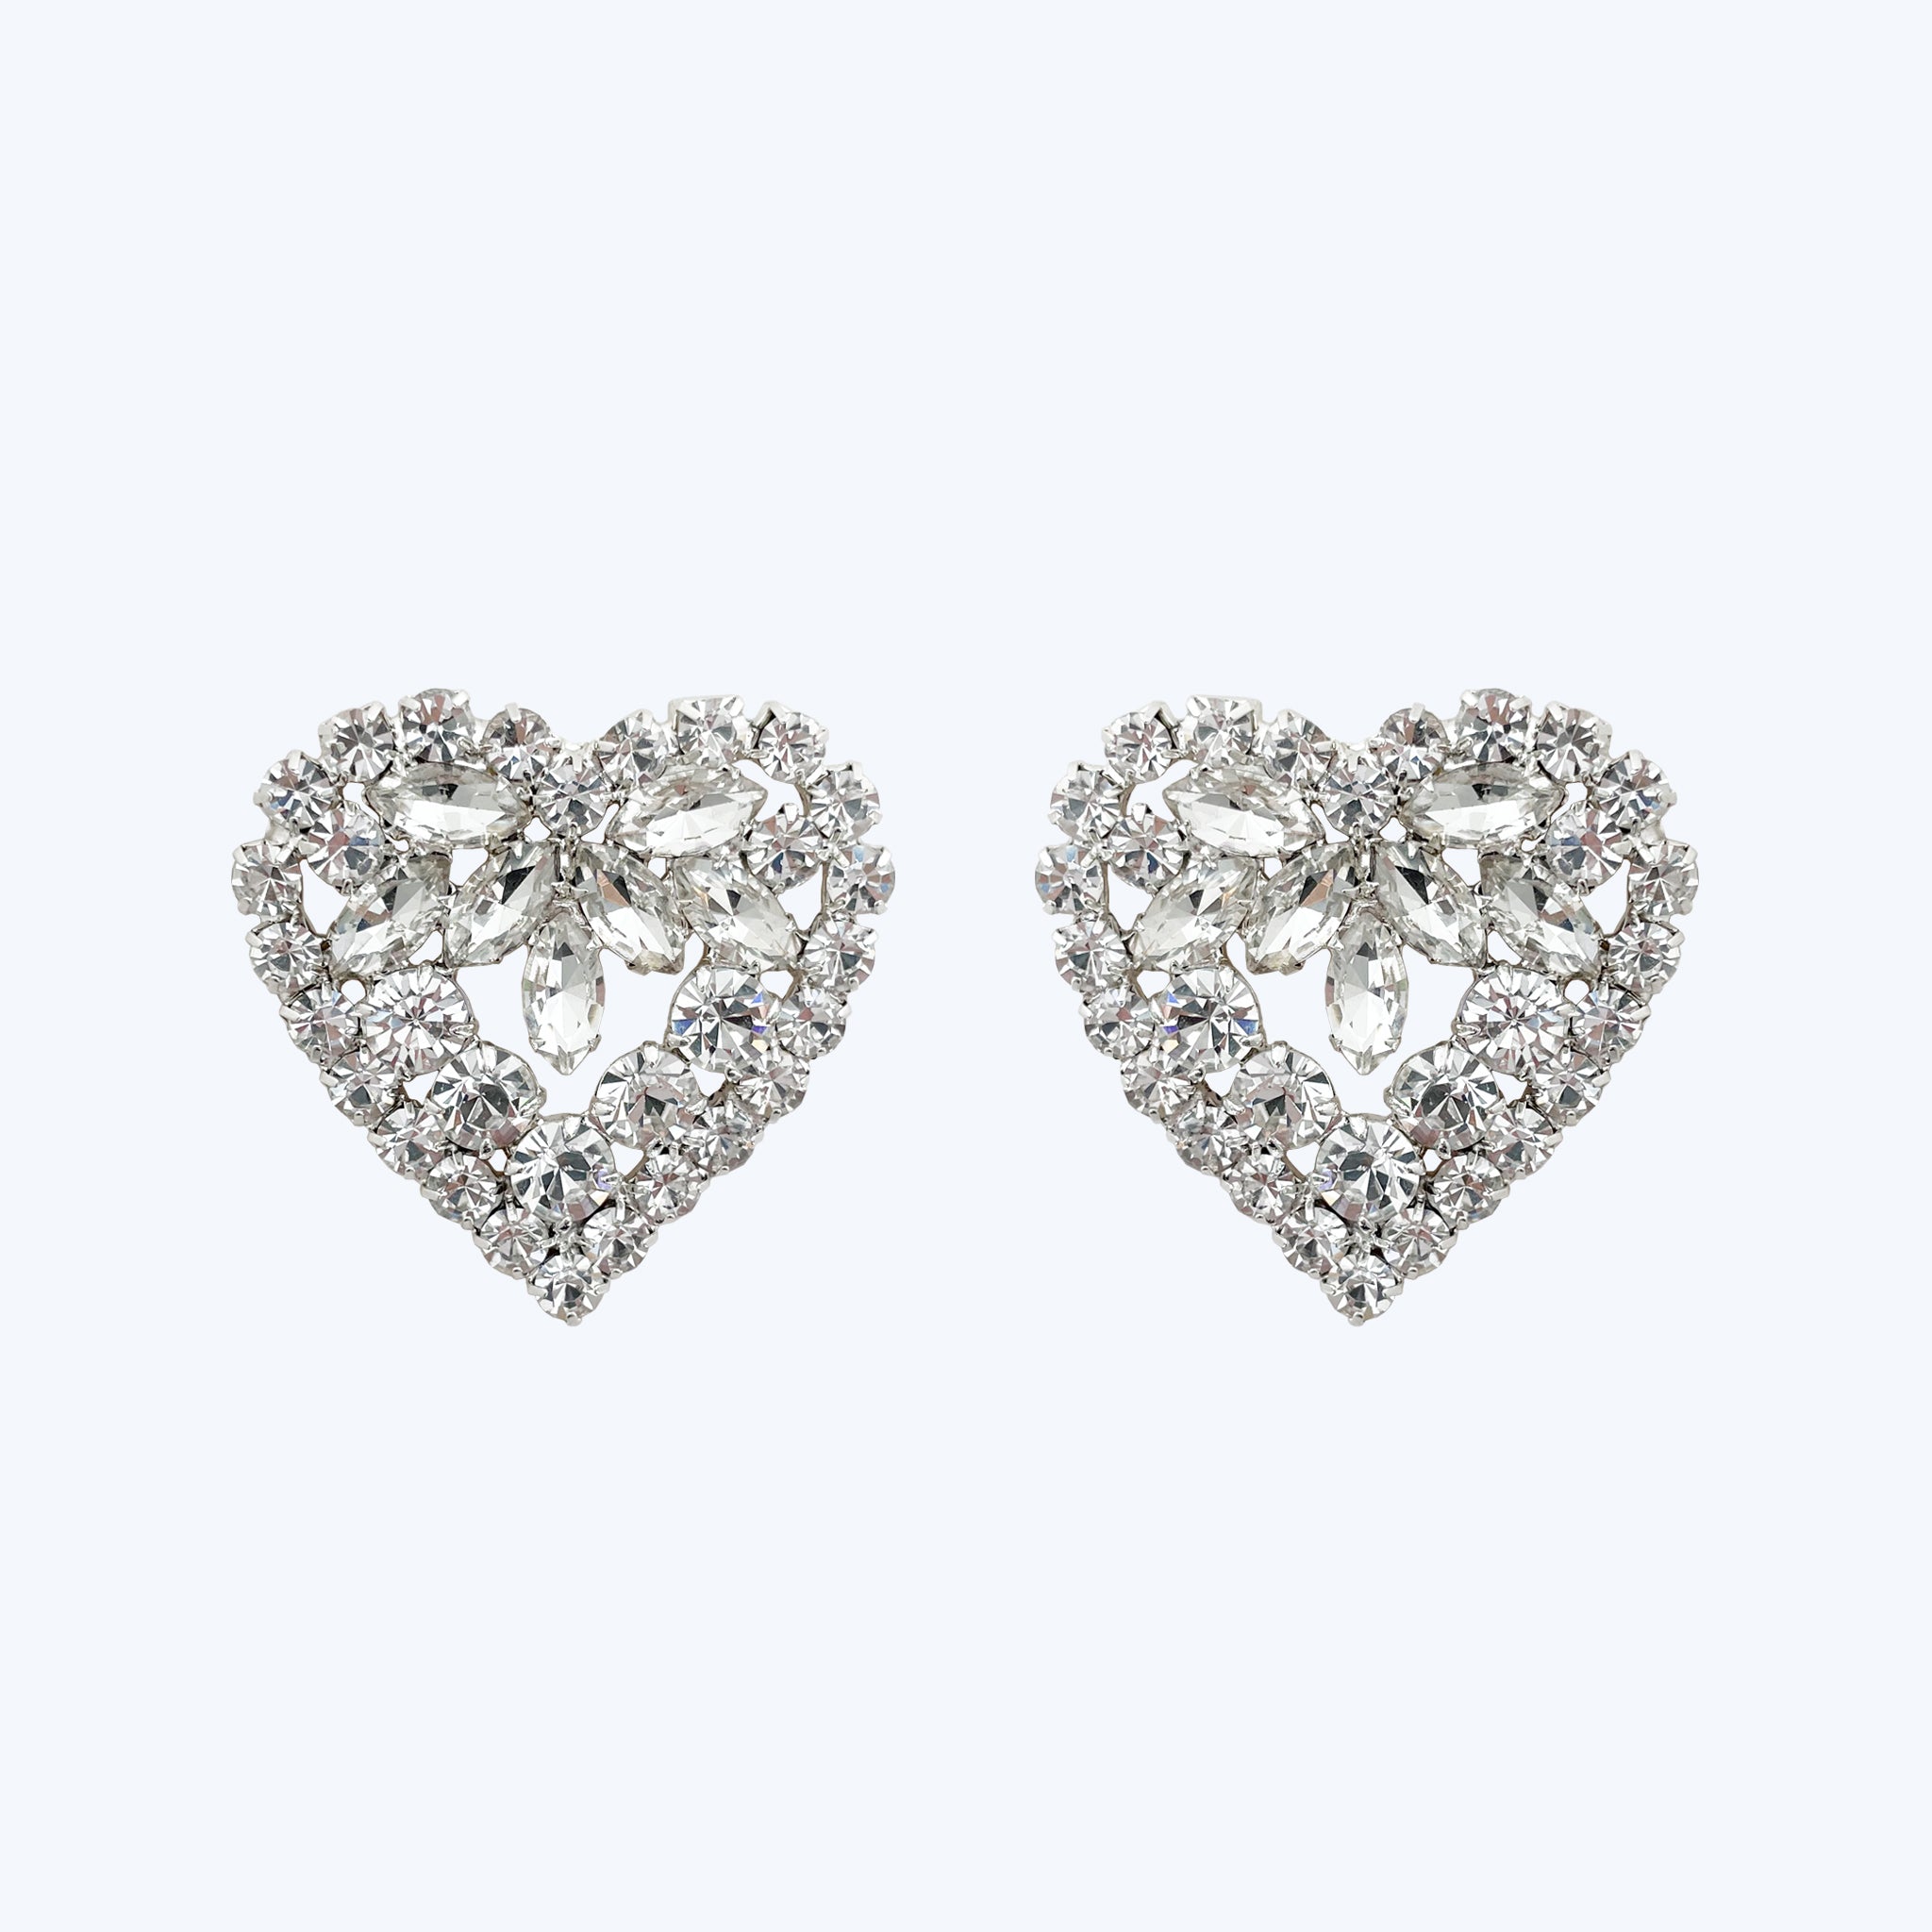 "Love Sparkle" Earrings - Limited Edition